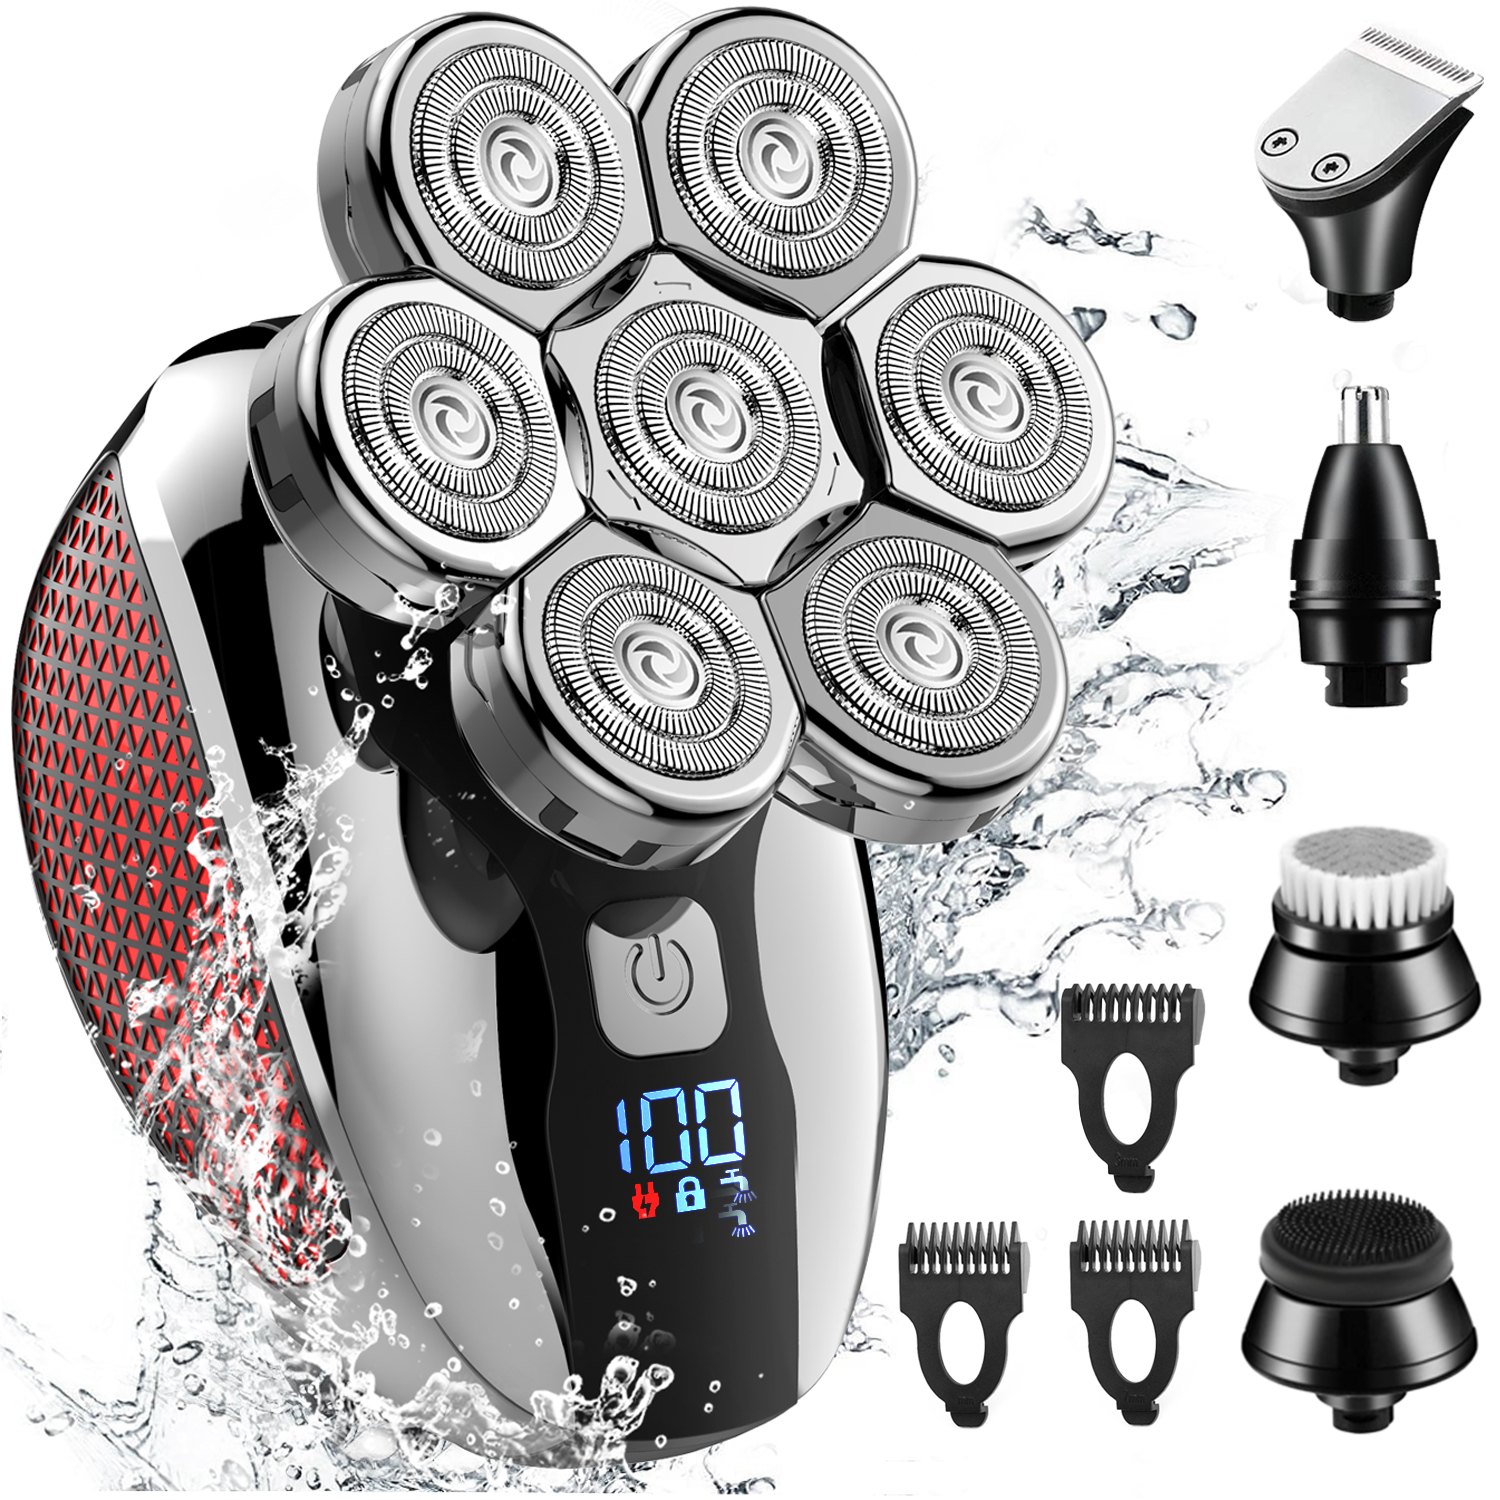 Head Shavers for Bald Men, Homsor Bald Head Shavers for Men Waterproof Wet&Dry,7D Electric Head Shaver for Men with Hair Sideburns Trimmer,5 in 1 Electric Shaver Head Razor Cordless Men's Grooming Kit